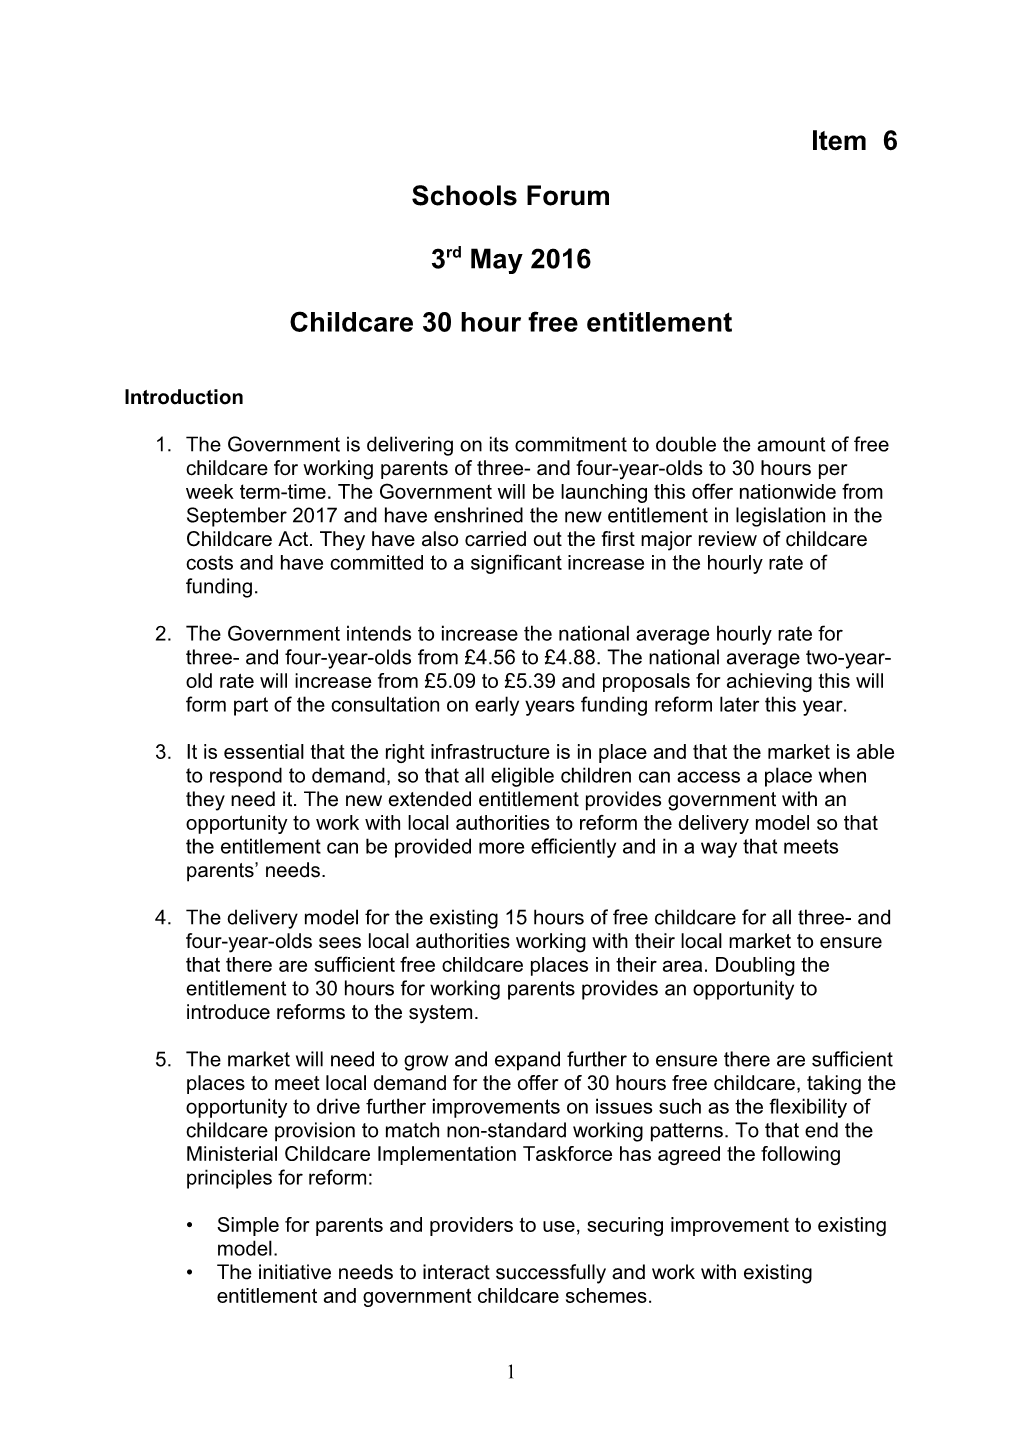 Childcare 30 Hour Free Entitlement